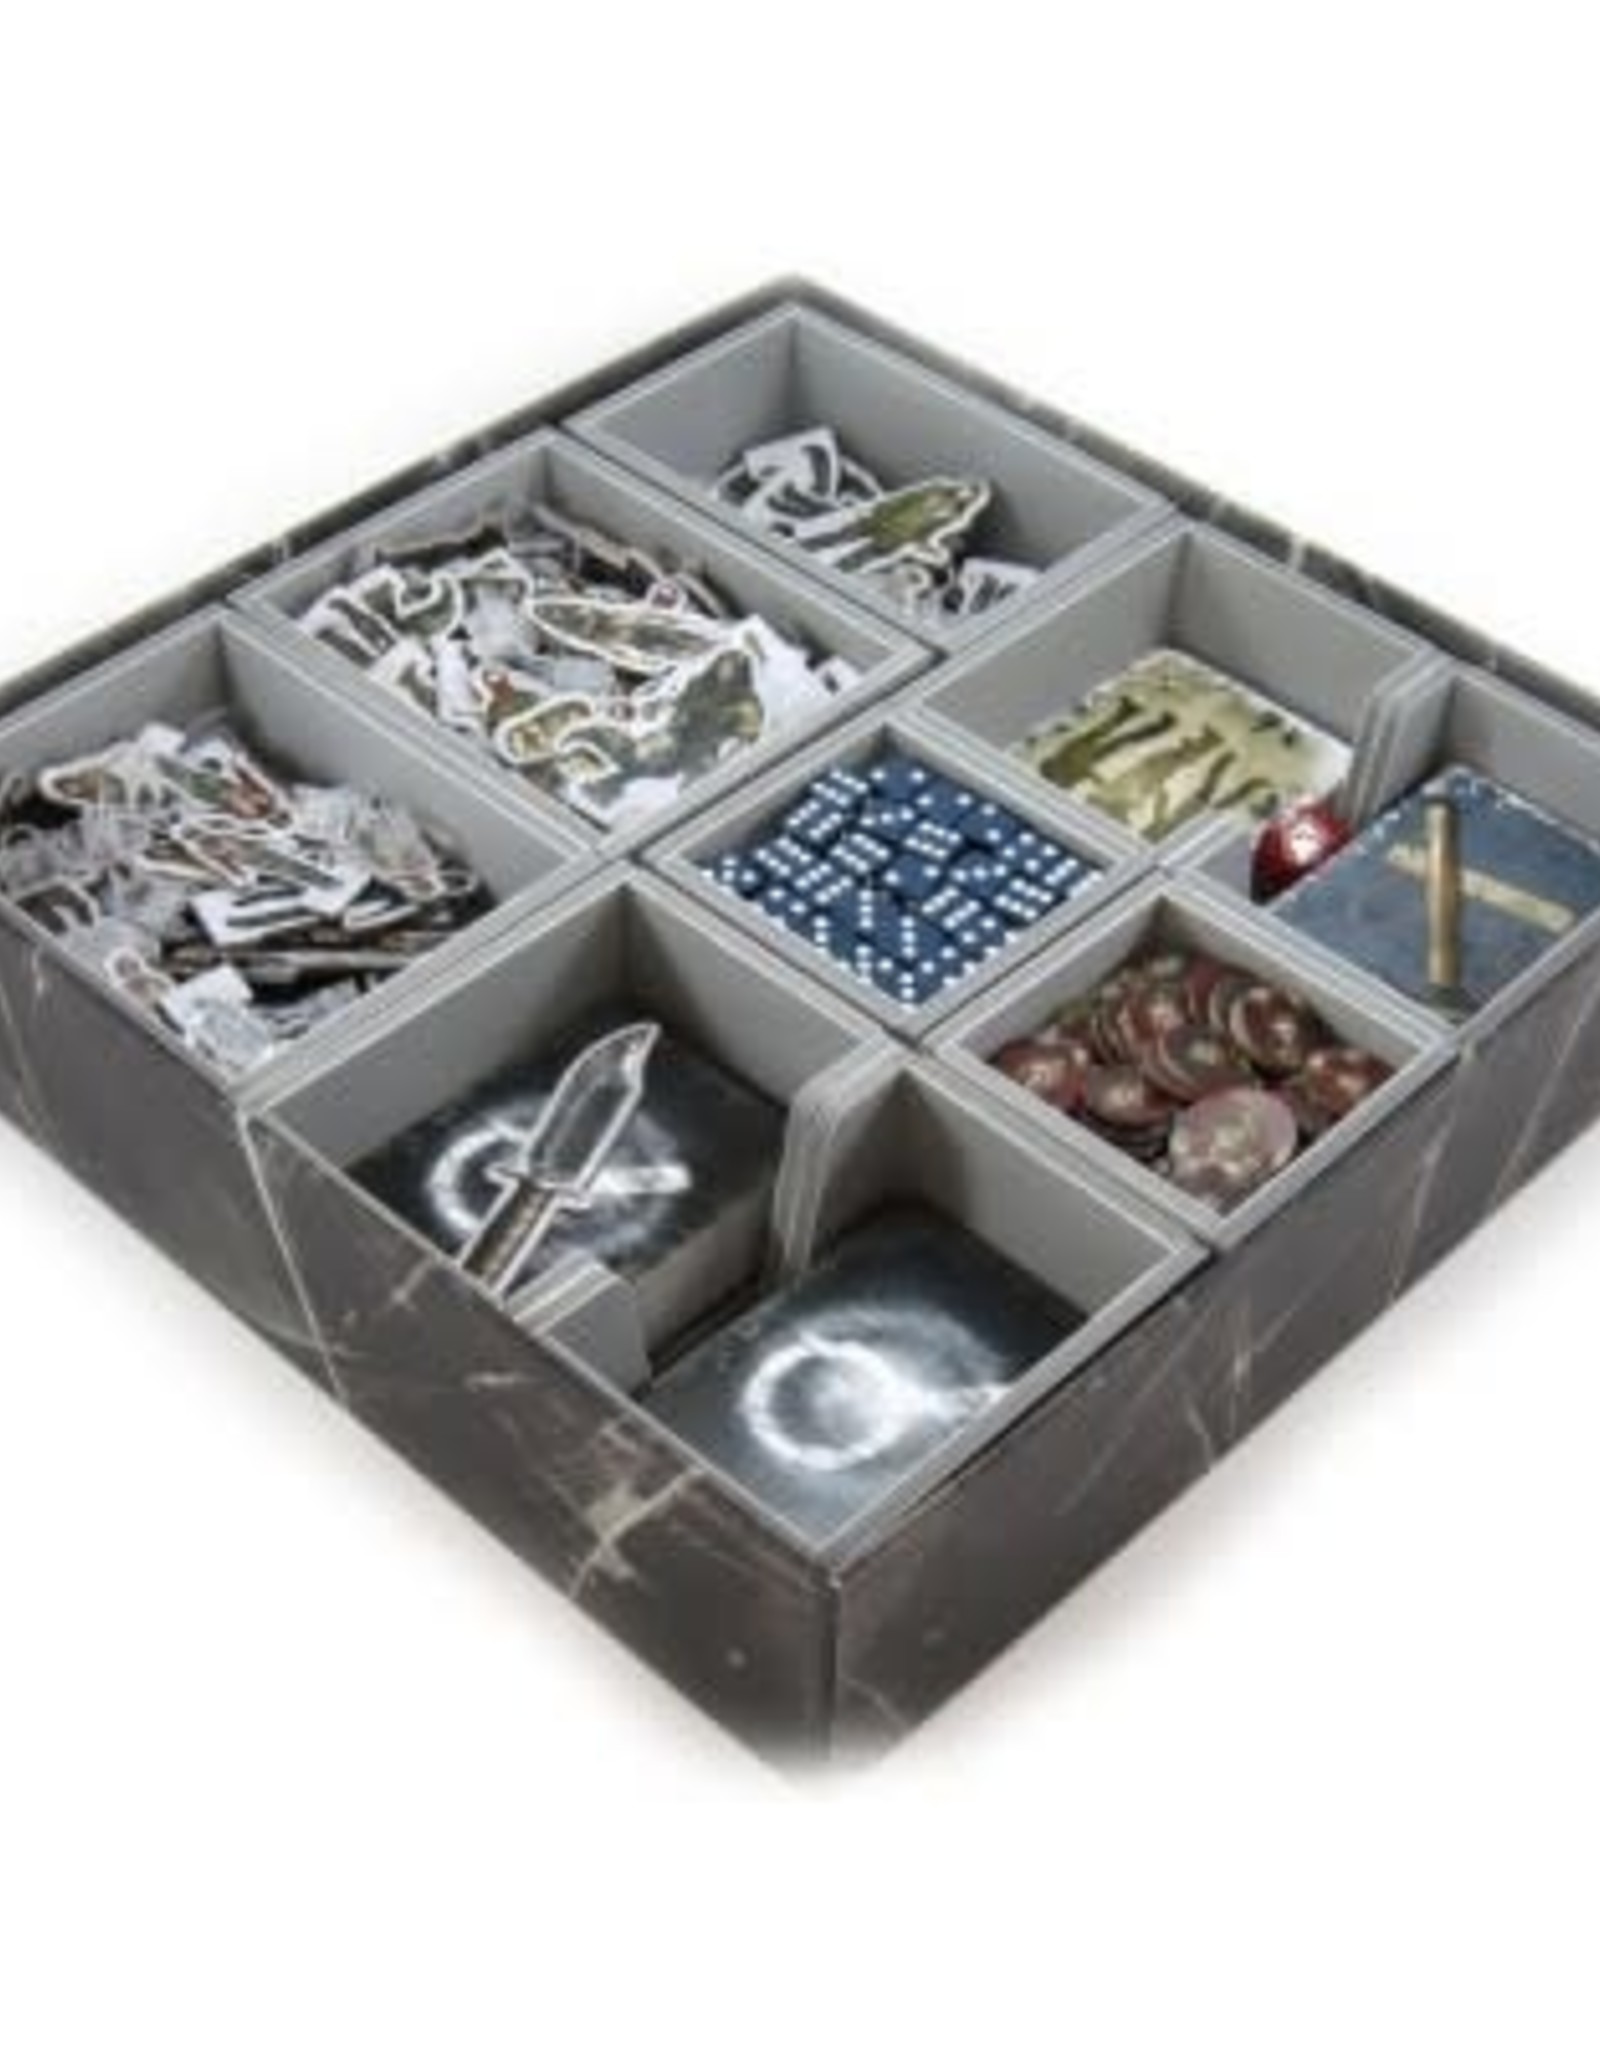 Folded Space Folded Space Box Insert: Dead of Winter or The Long Night